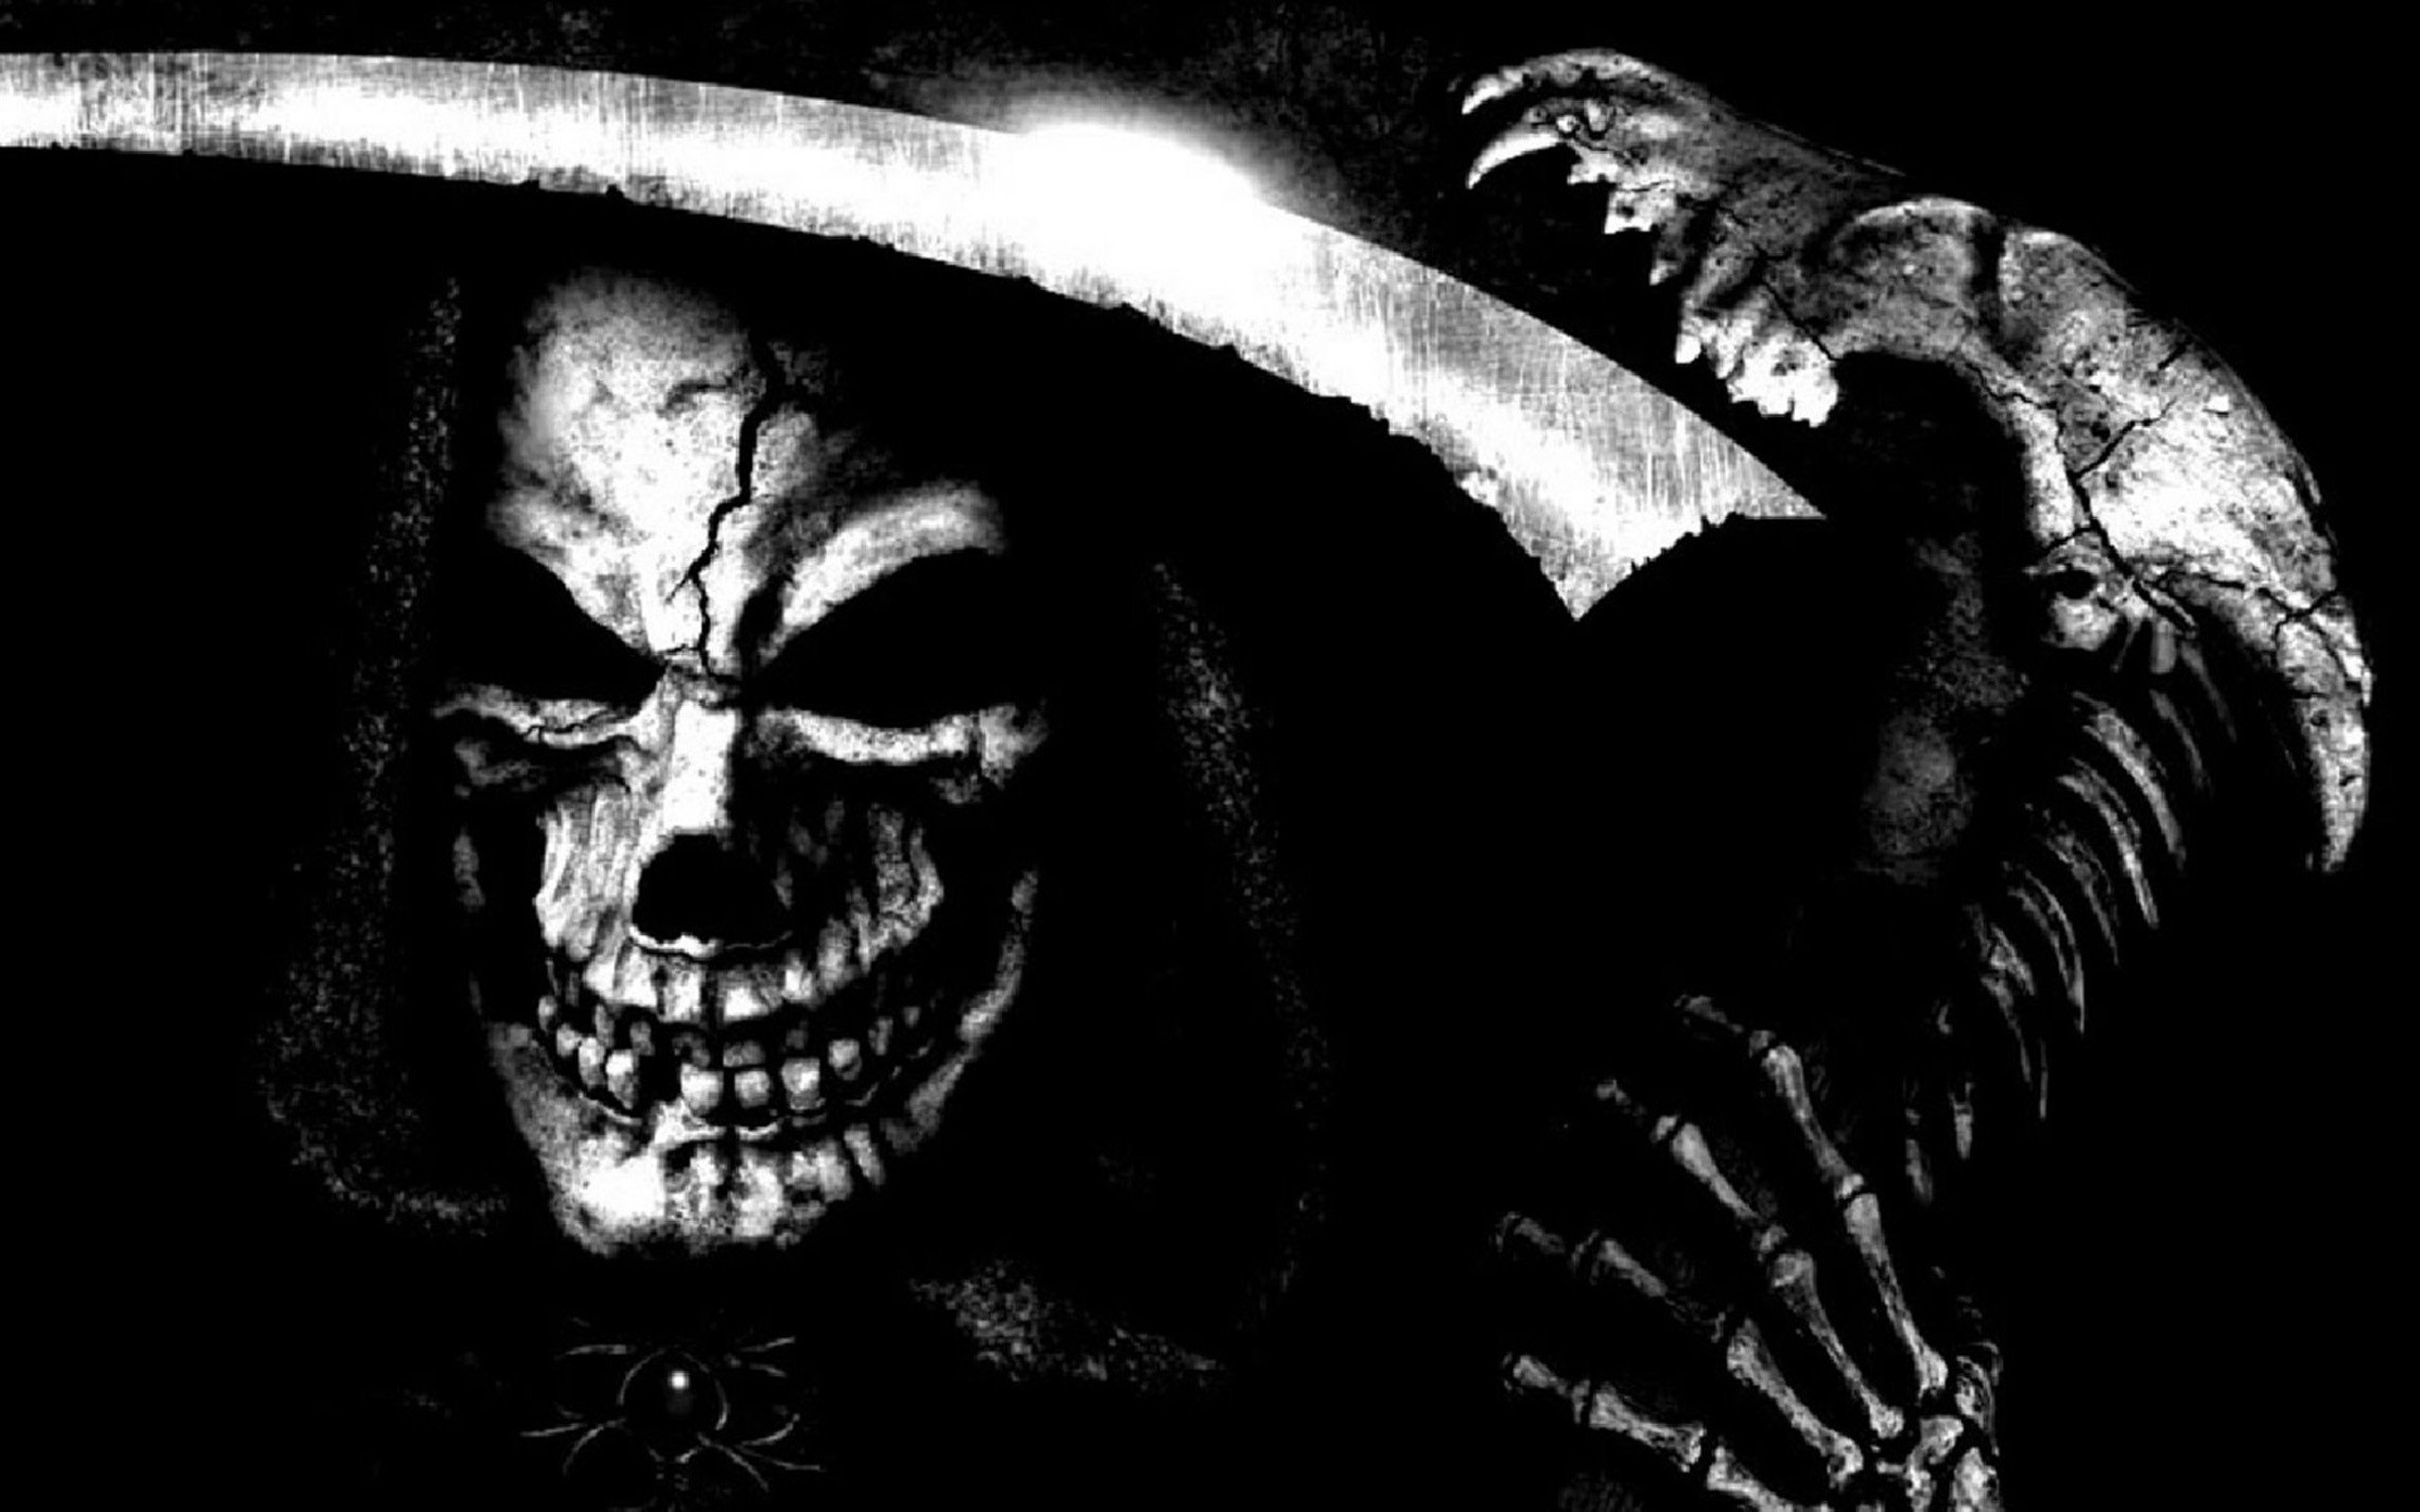 Dark Evil Horror Spooky Creepy Scary Wallpaper The Punishment Of God Wallpaper & Background Download